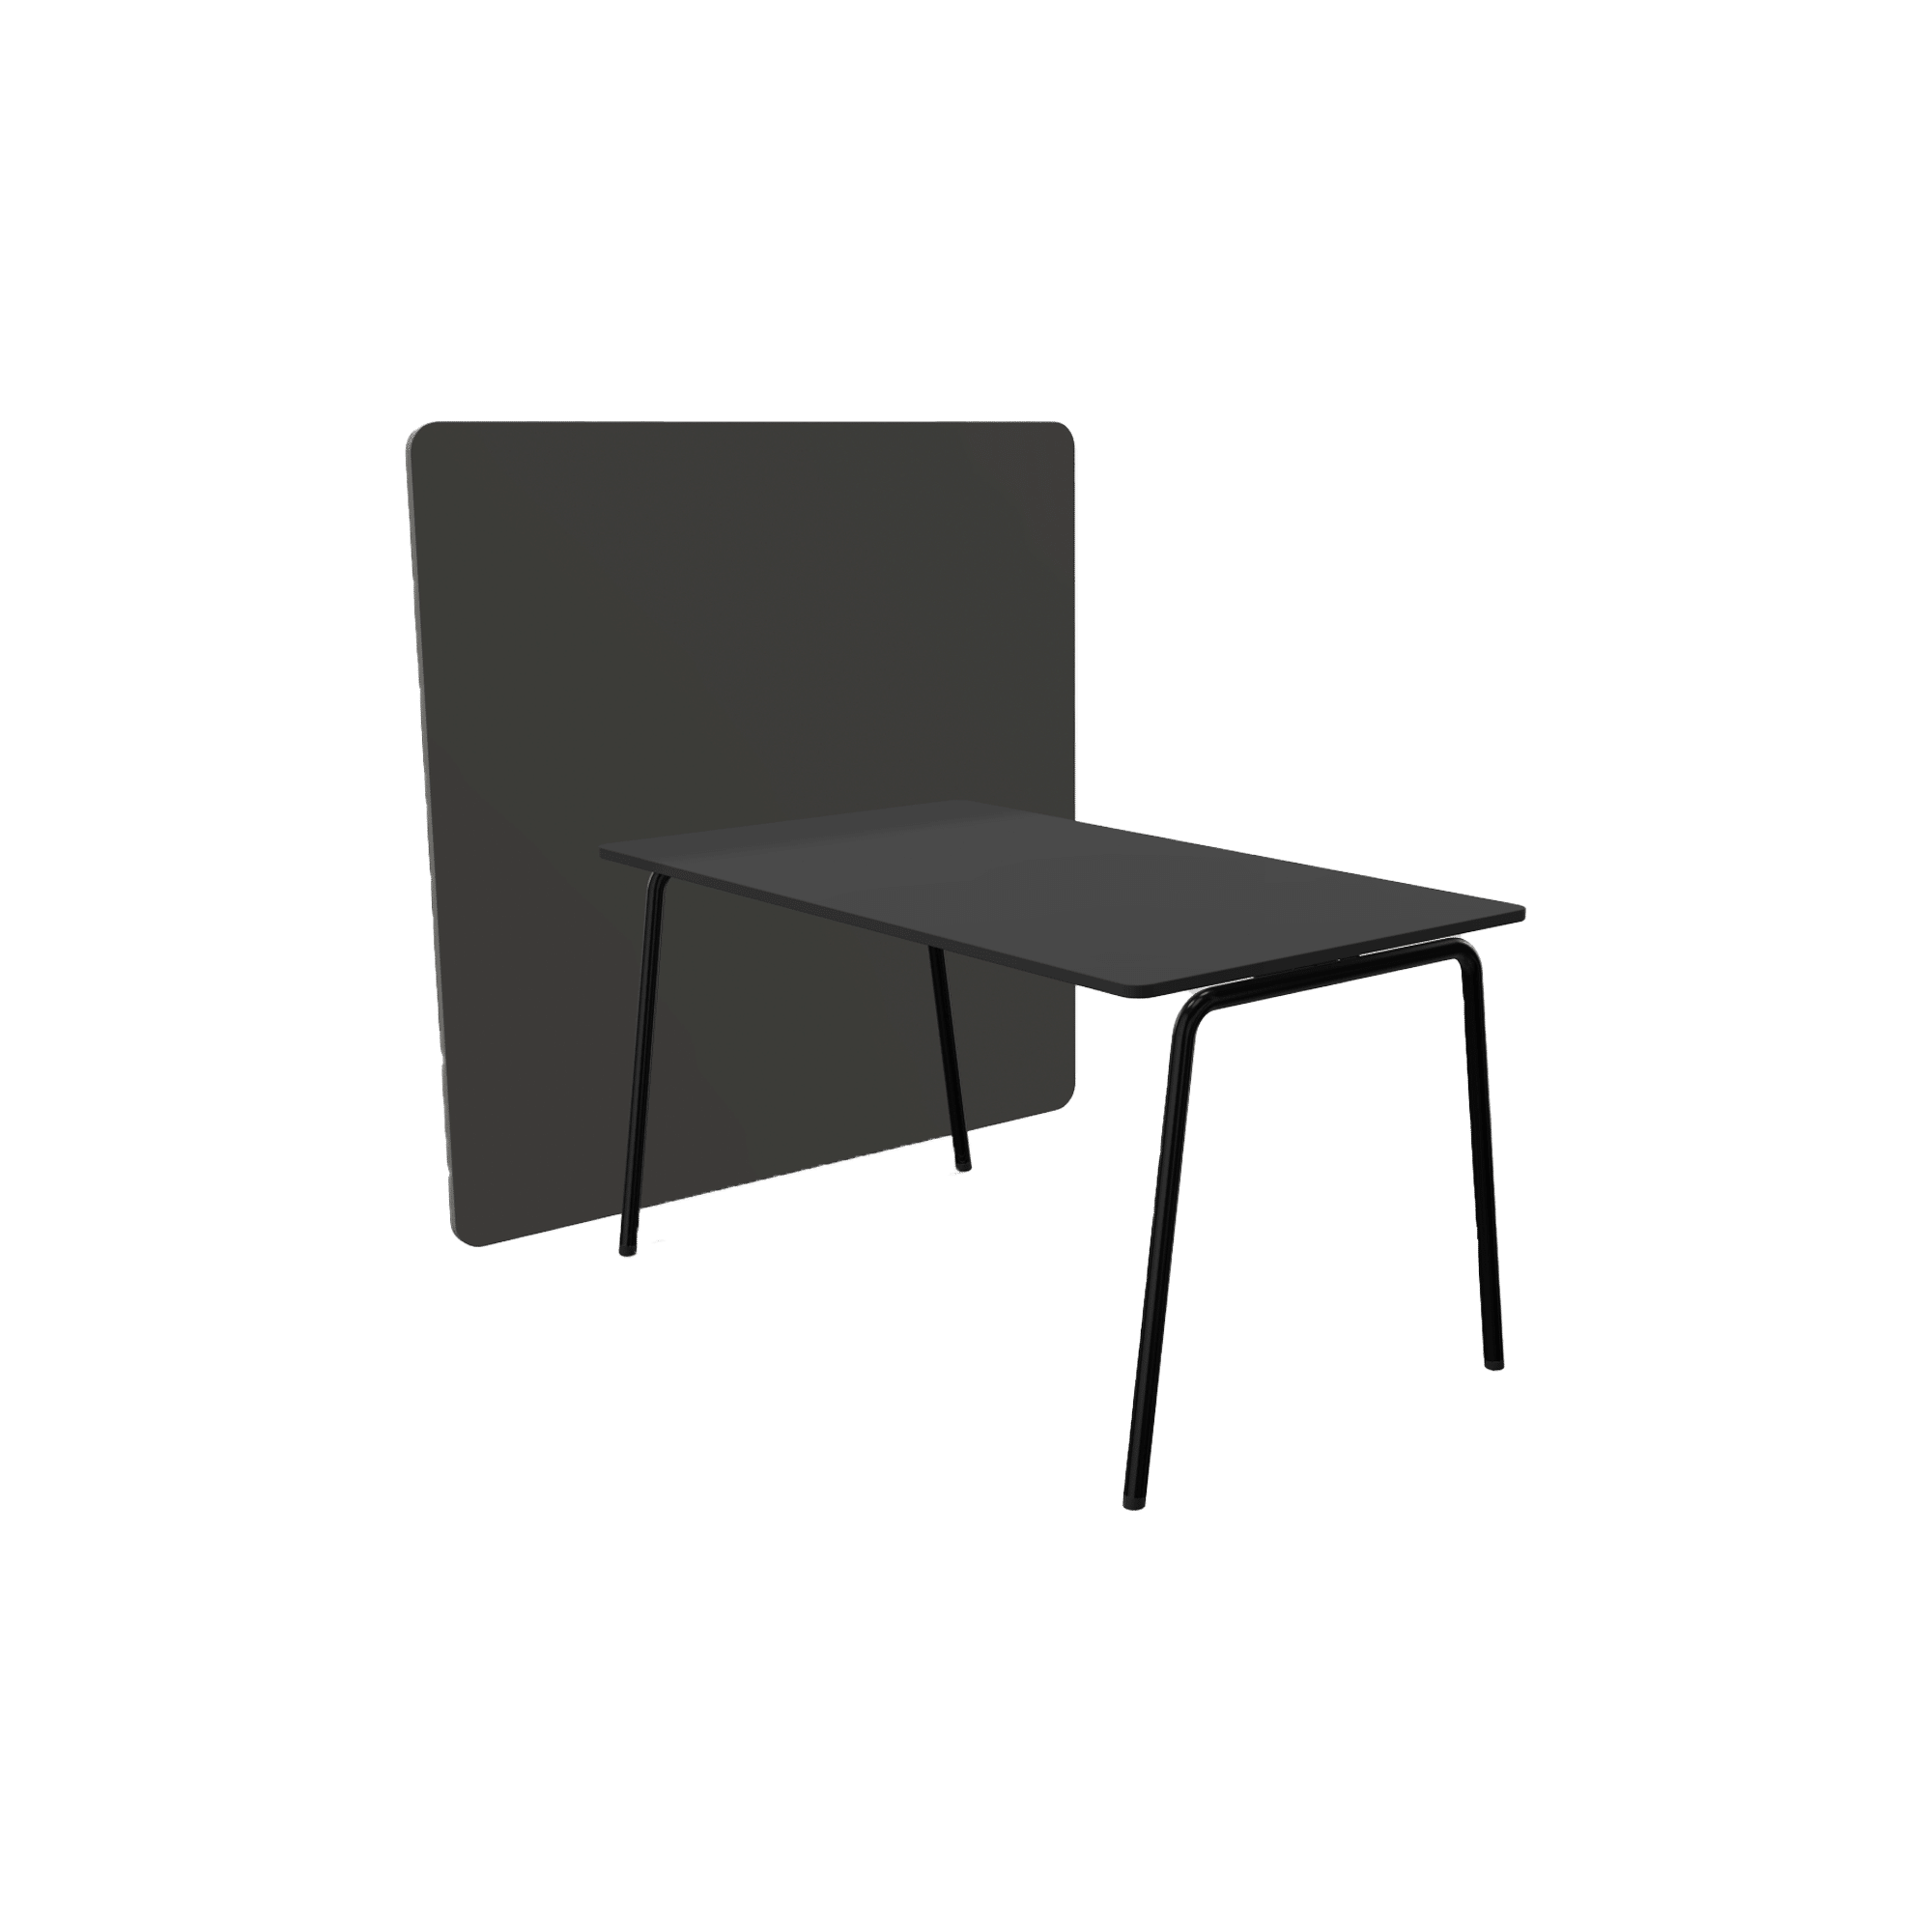 Folding Table Buy it now for your multipurpose uses - Leeway